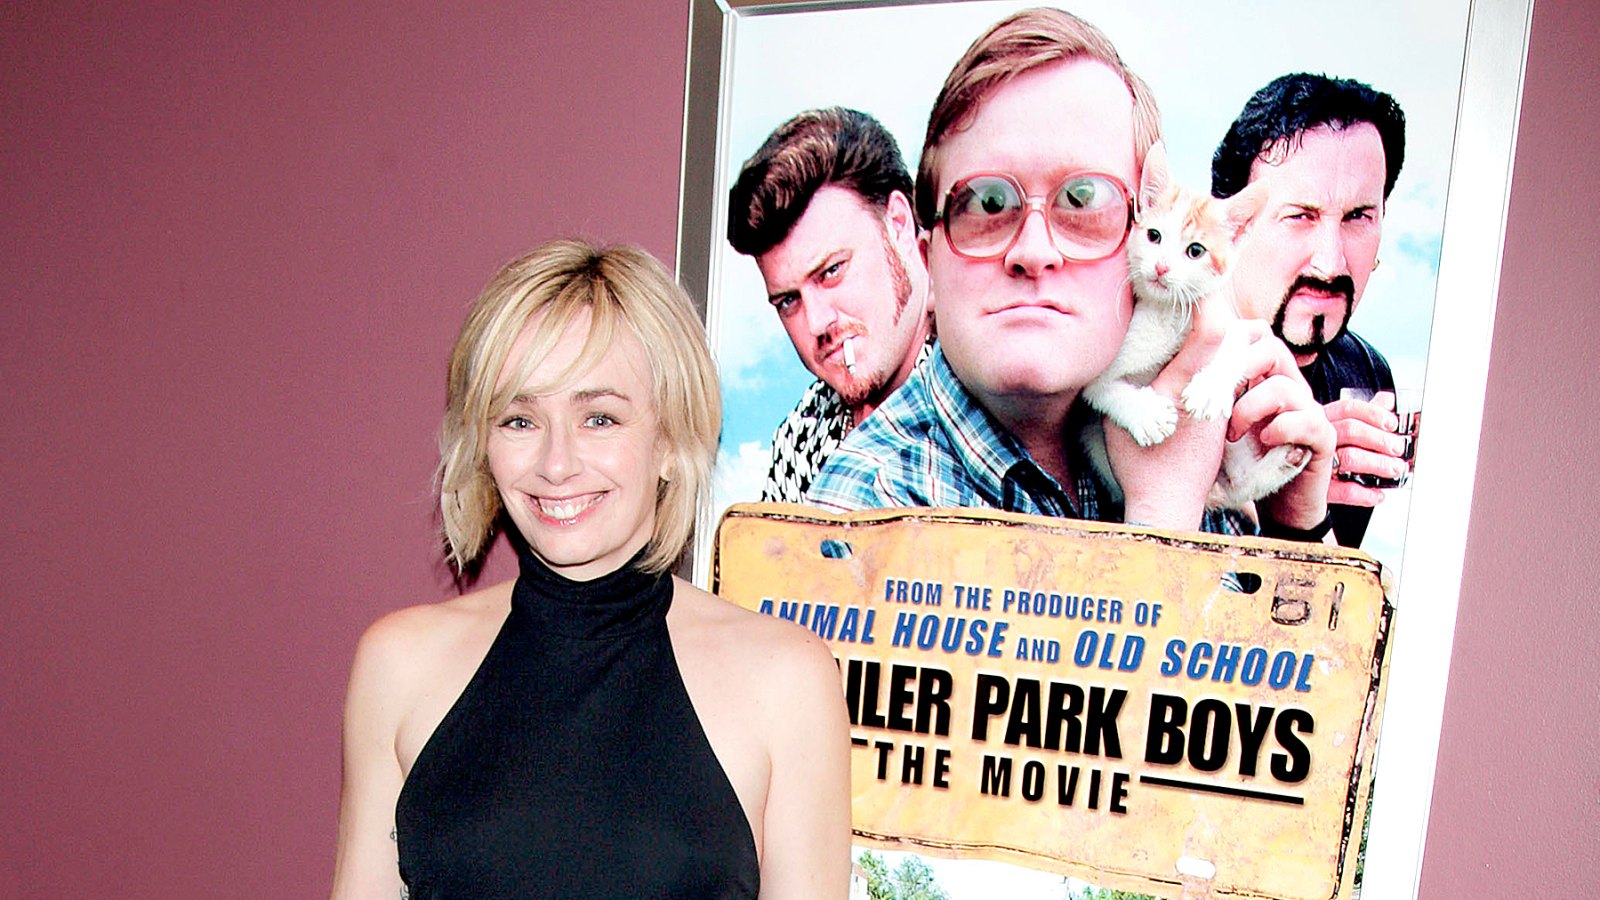 Lucy Decoutere arrives at the premiere of Screen Media Film's "Trailer Park Boys: The Movie" at the Laemmle's Sunset 5 Theater on January 23, 2008 in West Hollywood, California.